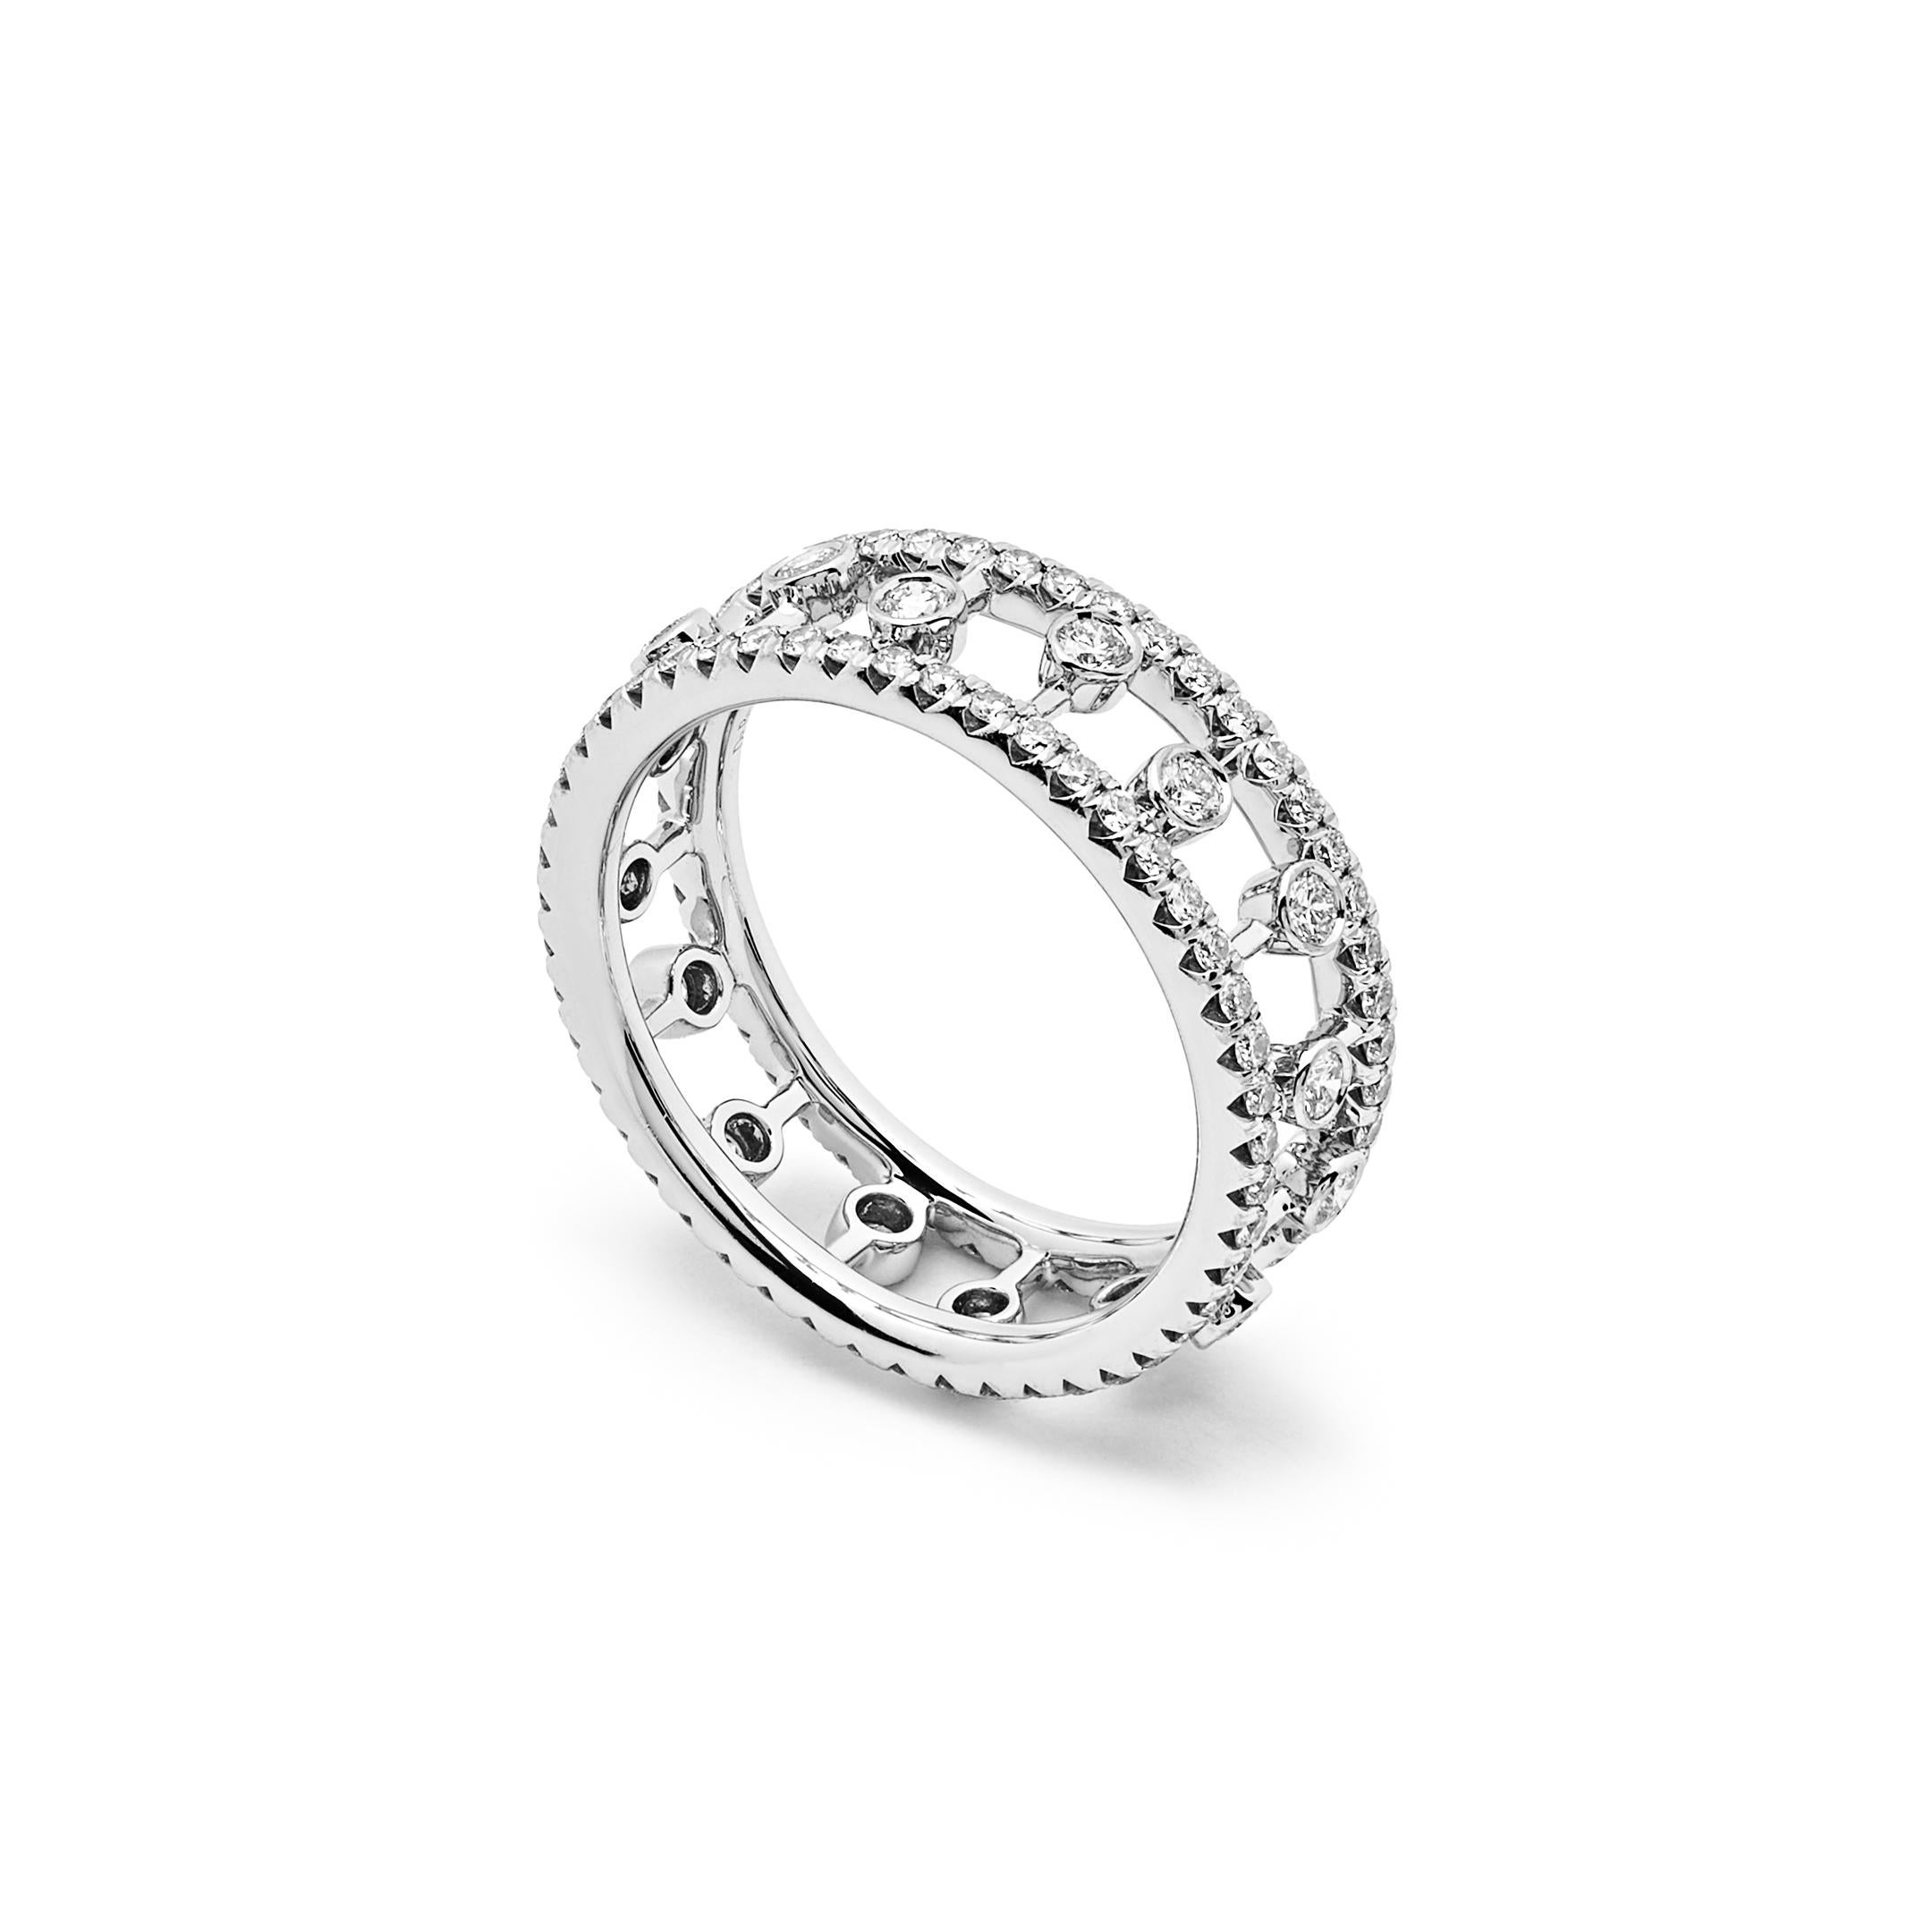 Post-War De Beers Dewdrop Collection Band in White Gold set with Micropavé Diamonds. For Sale